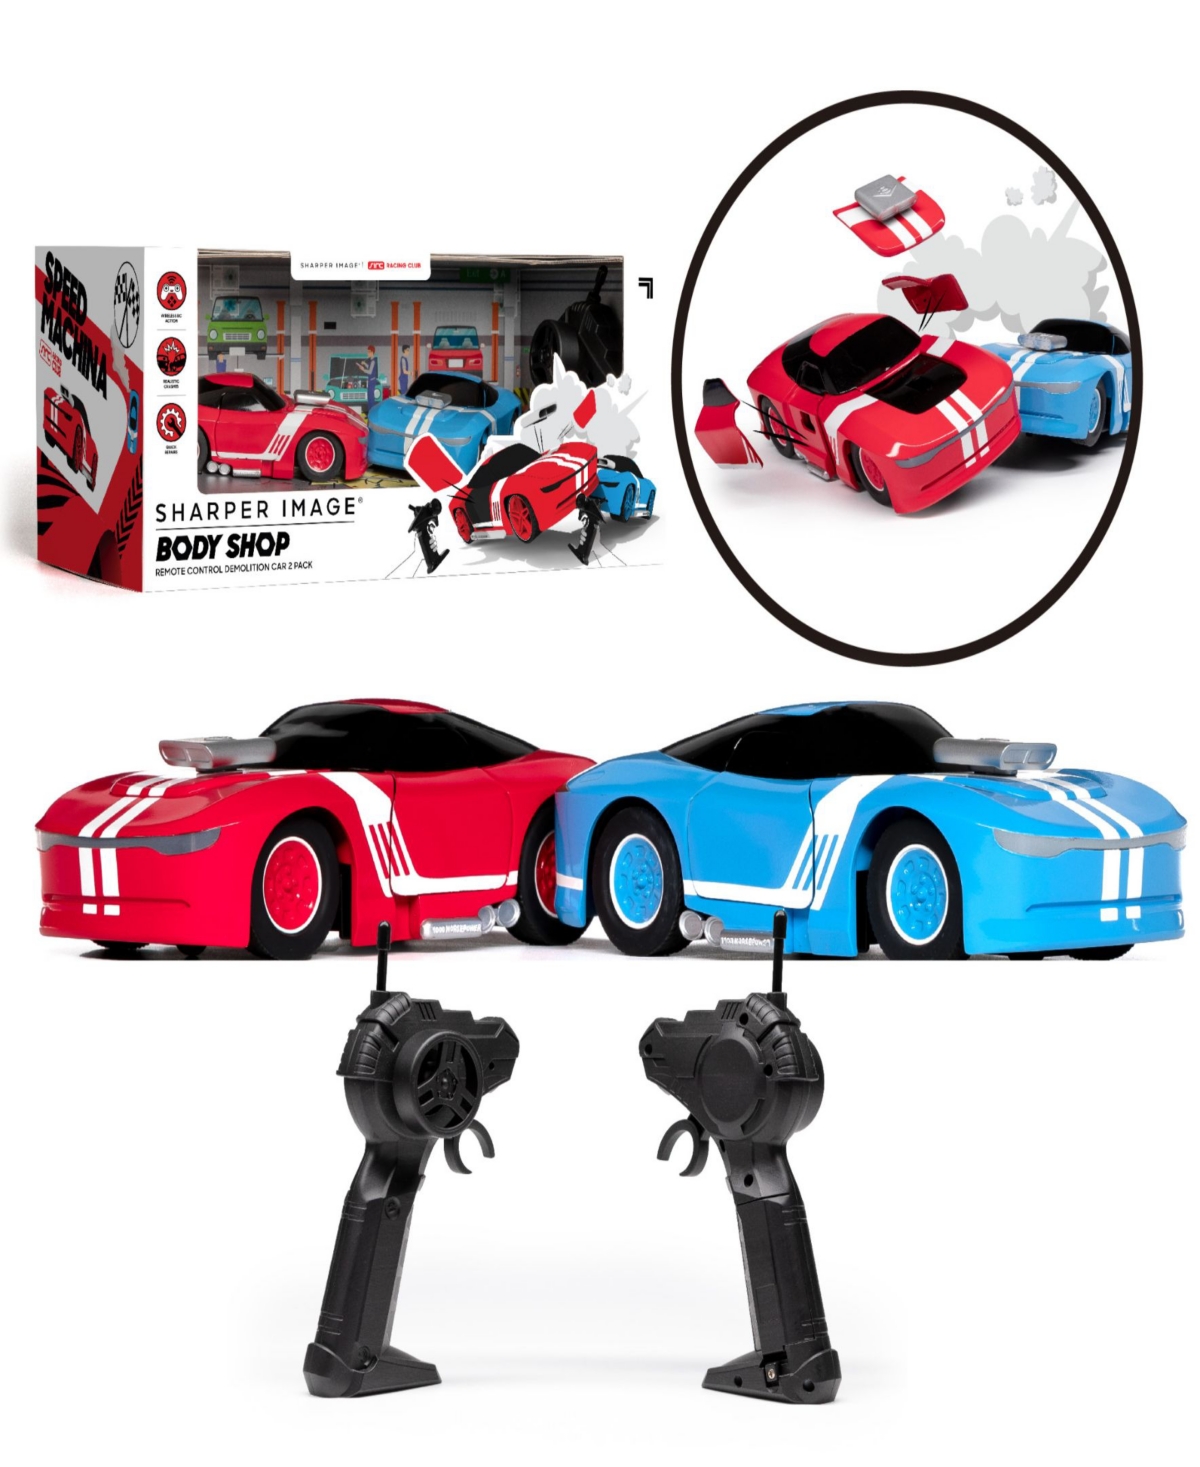 Sharper Image Body Shop Remote Control Demolition Car 2 Pack In Red And Blue